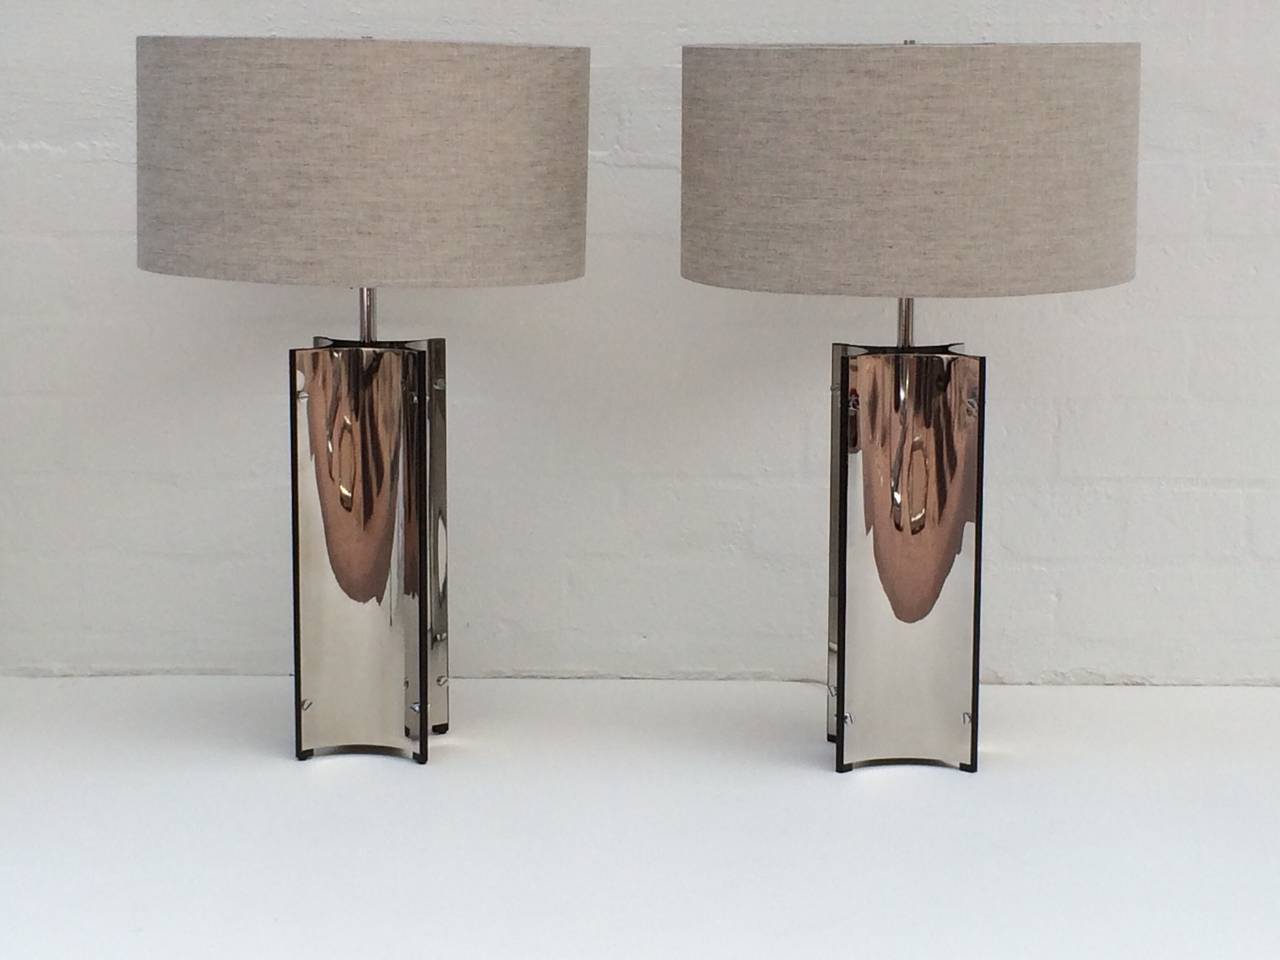 American Pair of Gerald Thurston for Lightolier Table Lamps